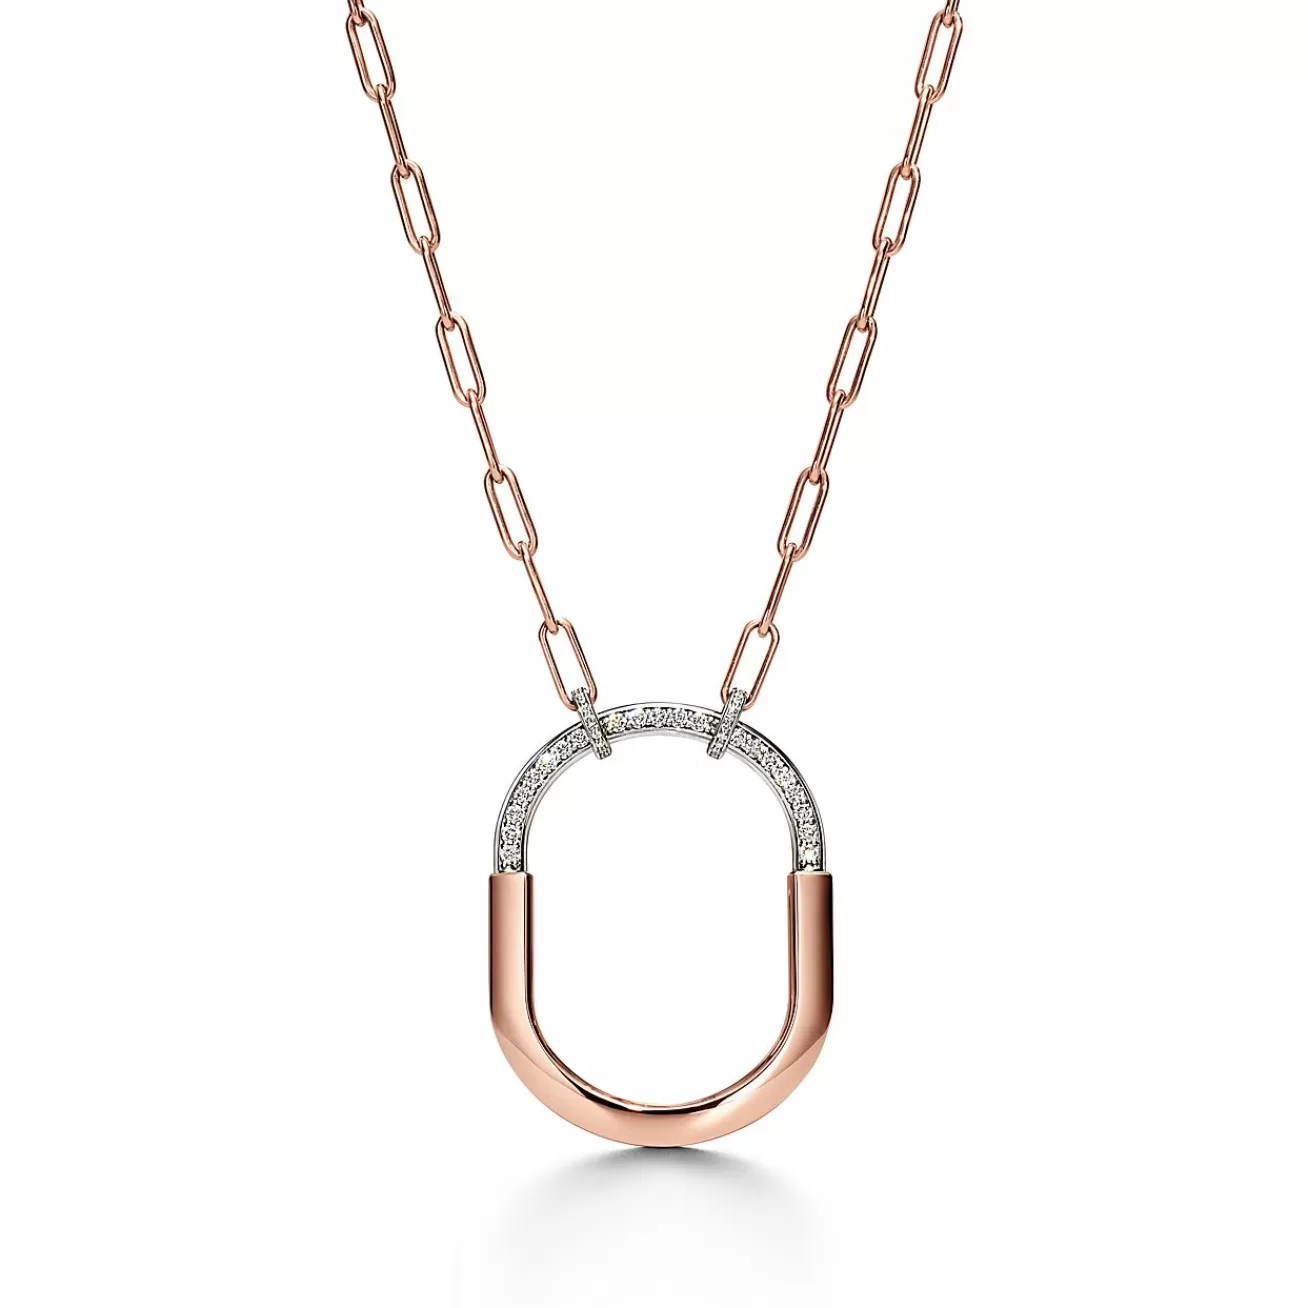 Tiffany & Co. Tiffany Lock Pendant in Rose and White Gold with Diamonds, Extra Large | ^ Necklaces & Pendants | Rose Gold Jewelry